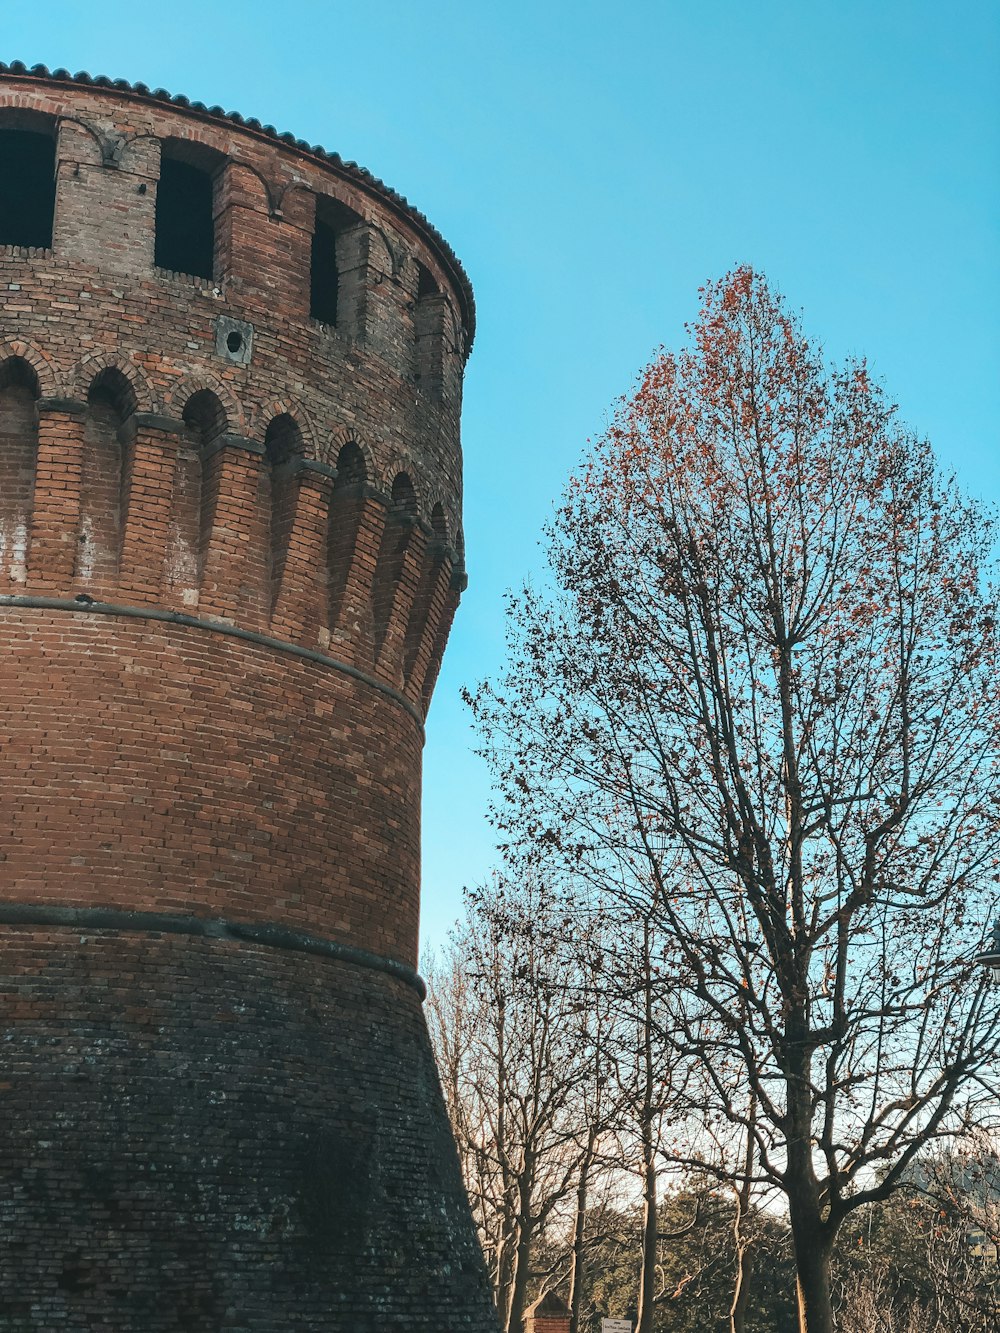 a brick tower with a tree in front of it